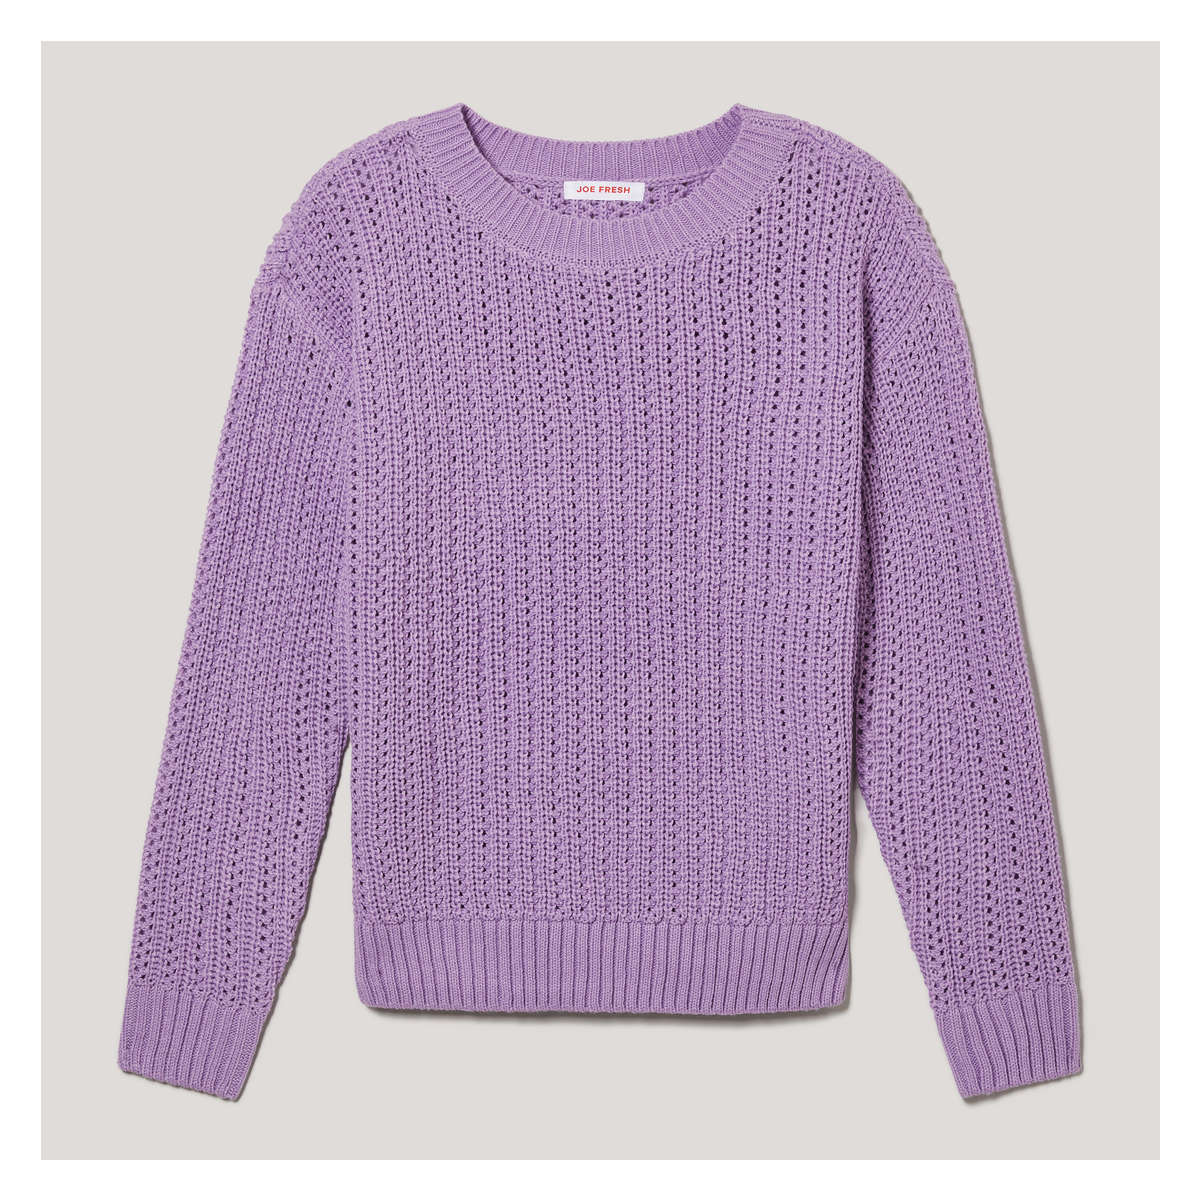 Textured Pullover in Open Violet from Joe Fresh